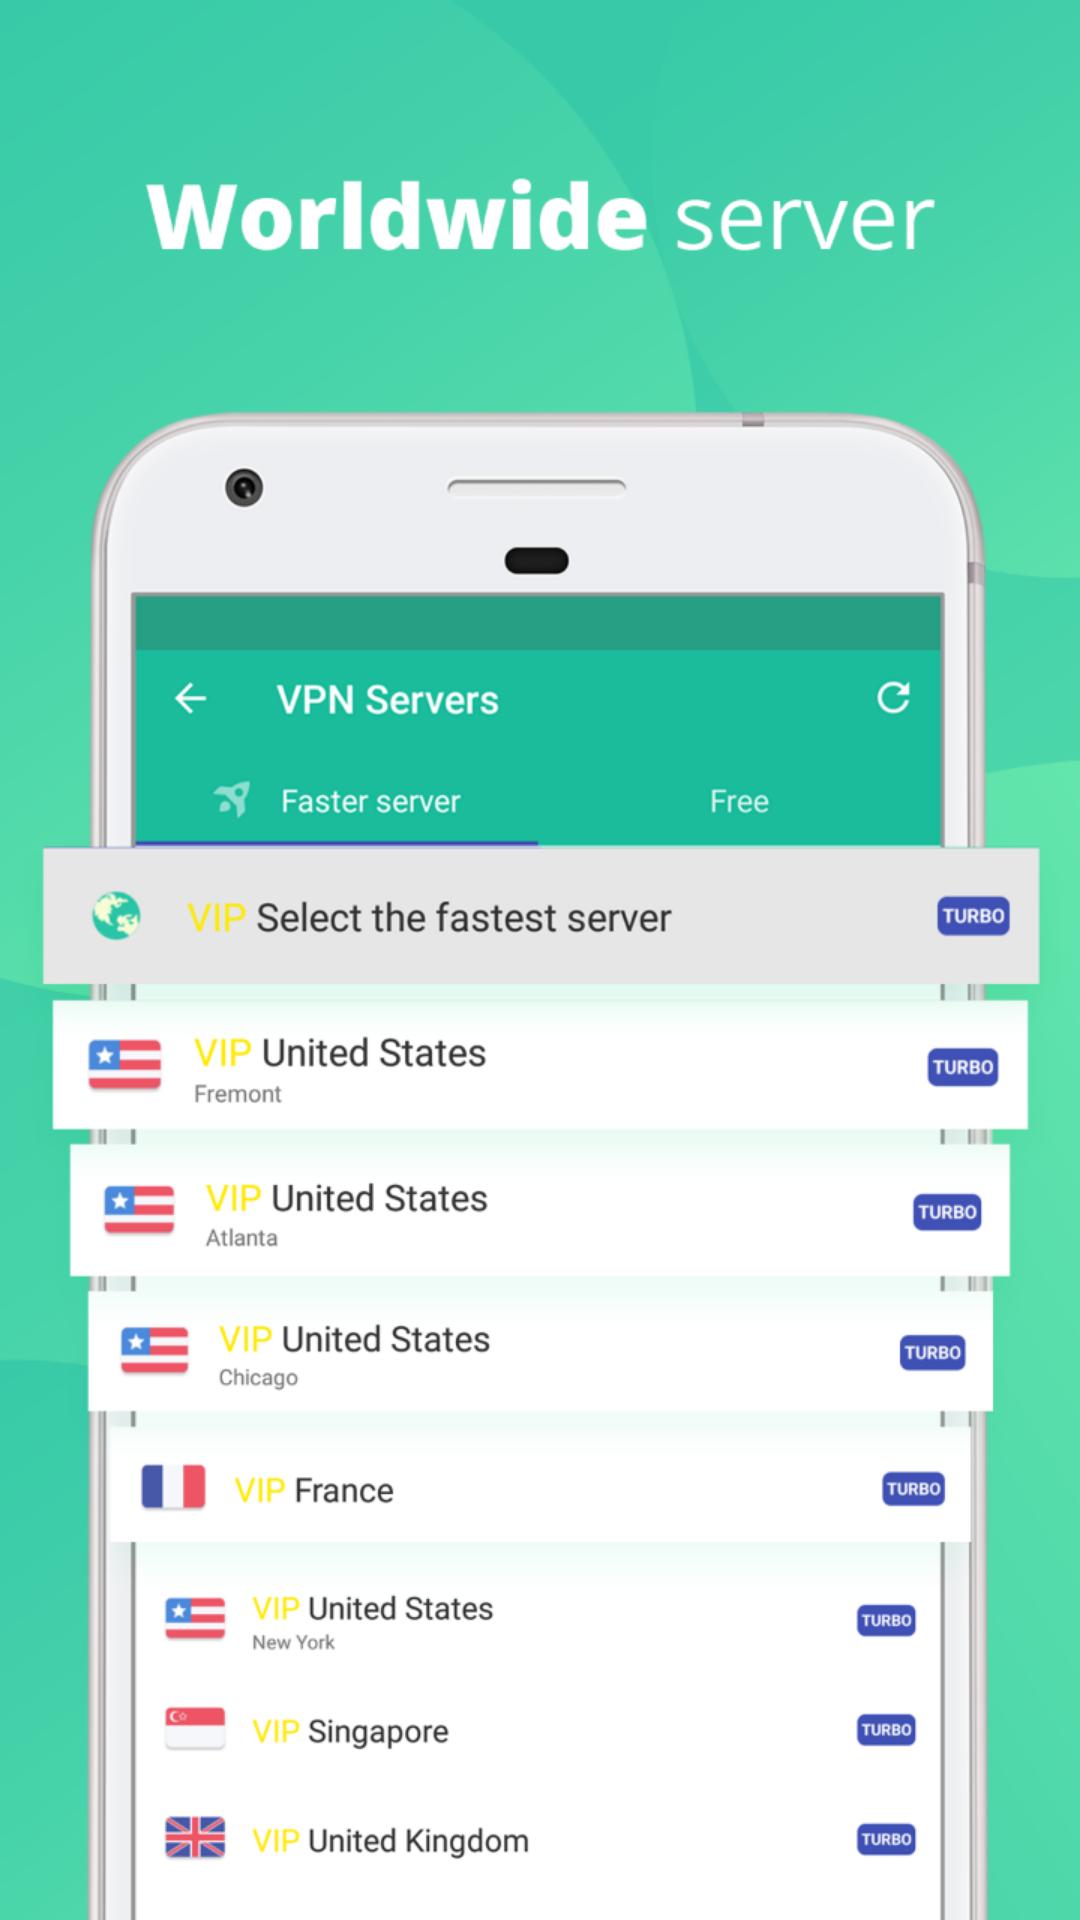 VPN INDIA for Android - APK Download